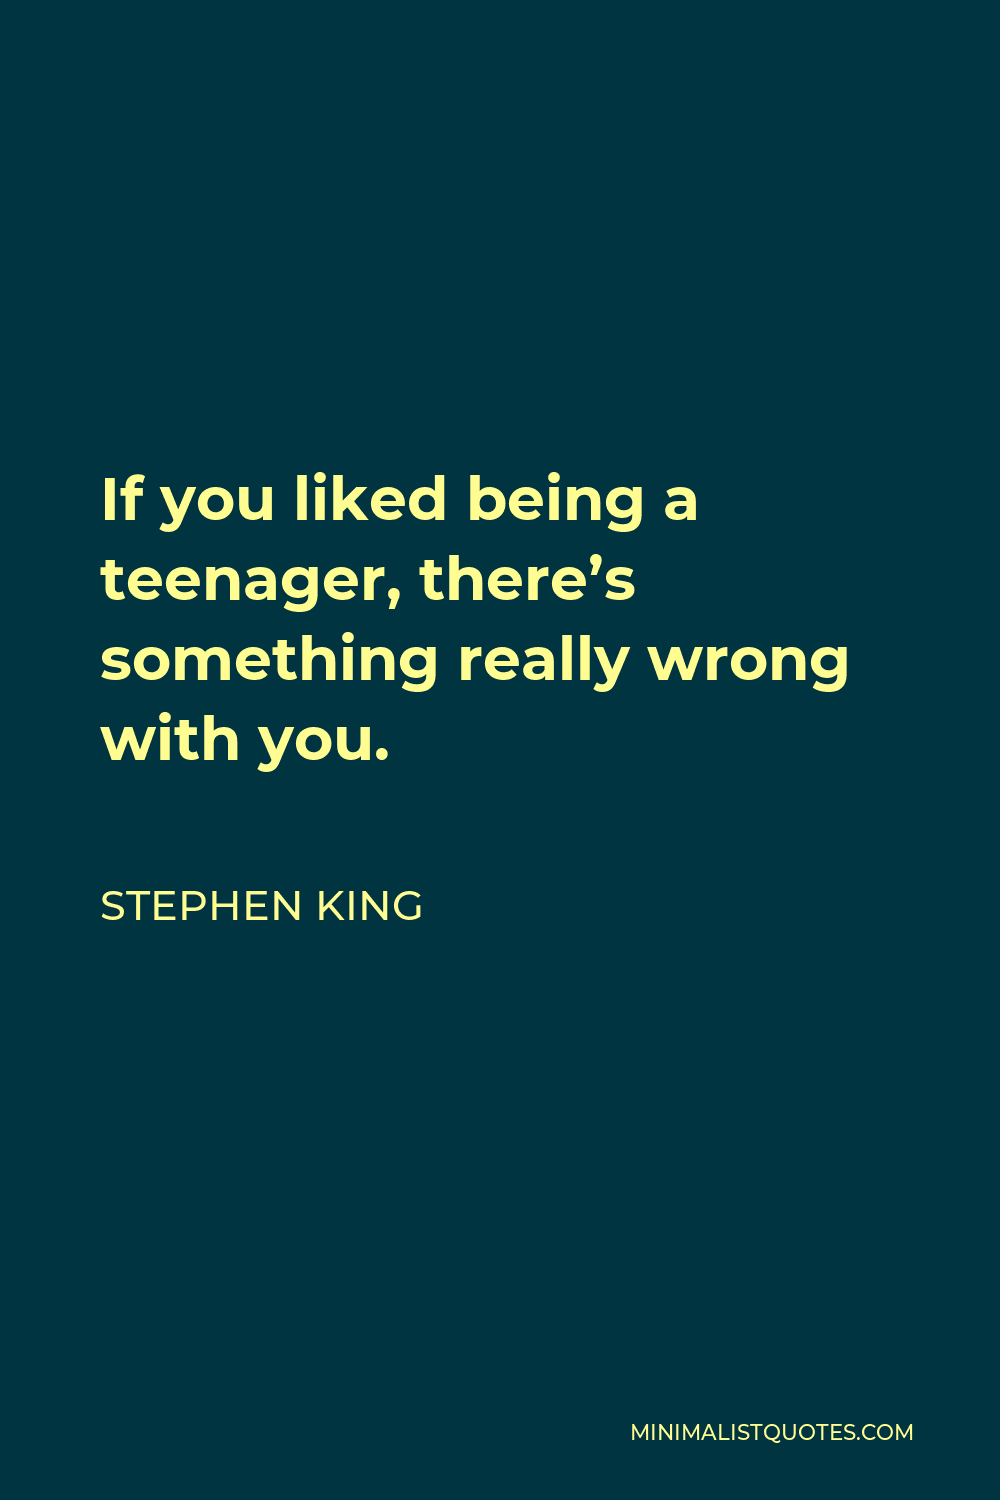 Stephen King Quote - If you liked being a teenager, there’s something really wrong with you.